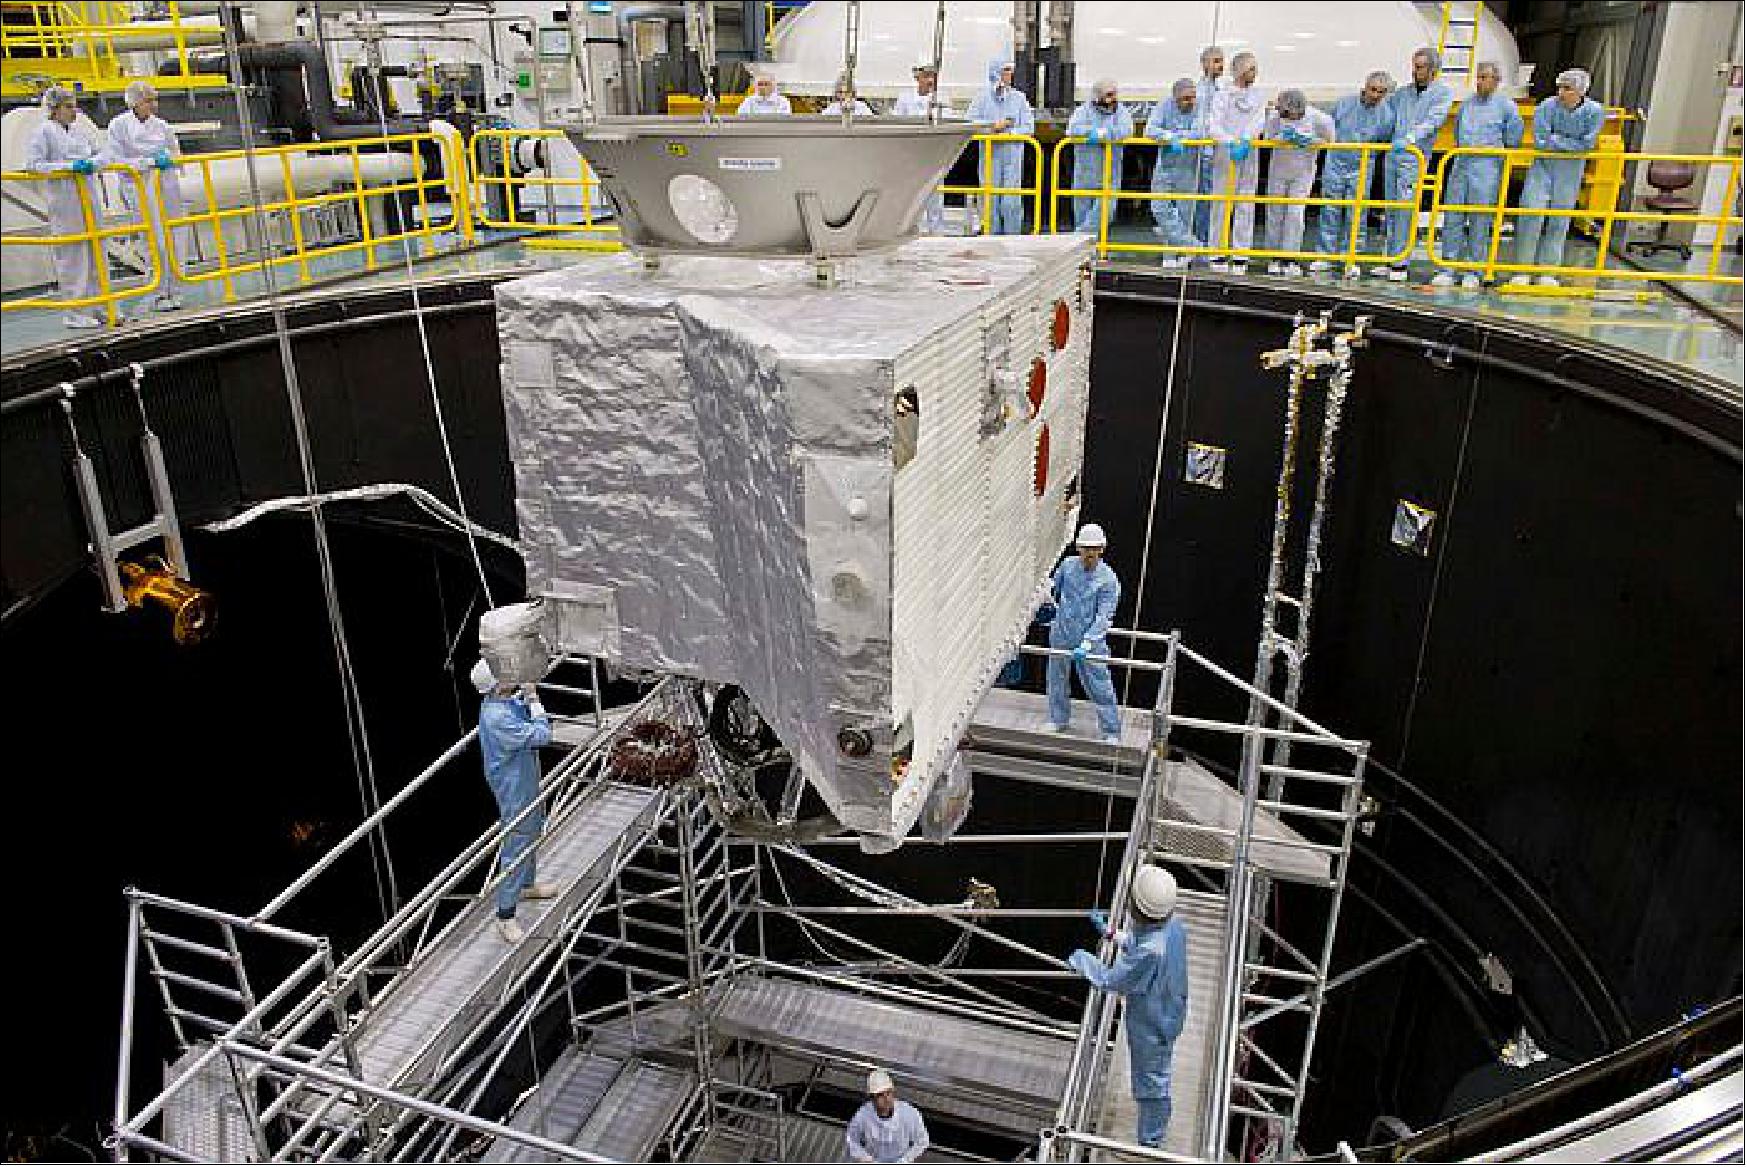 Figure 153: Photo of the BepiColombo spacecraft as it is moved into ESA’s space simulator (image credit: ESA) 153)